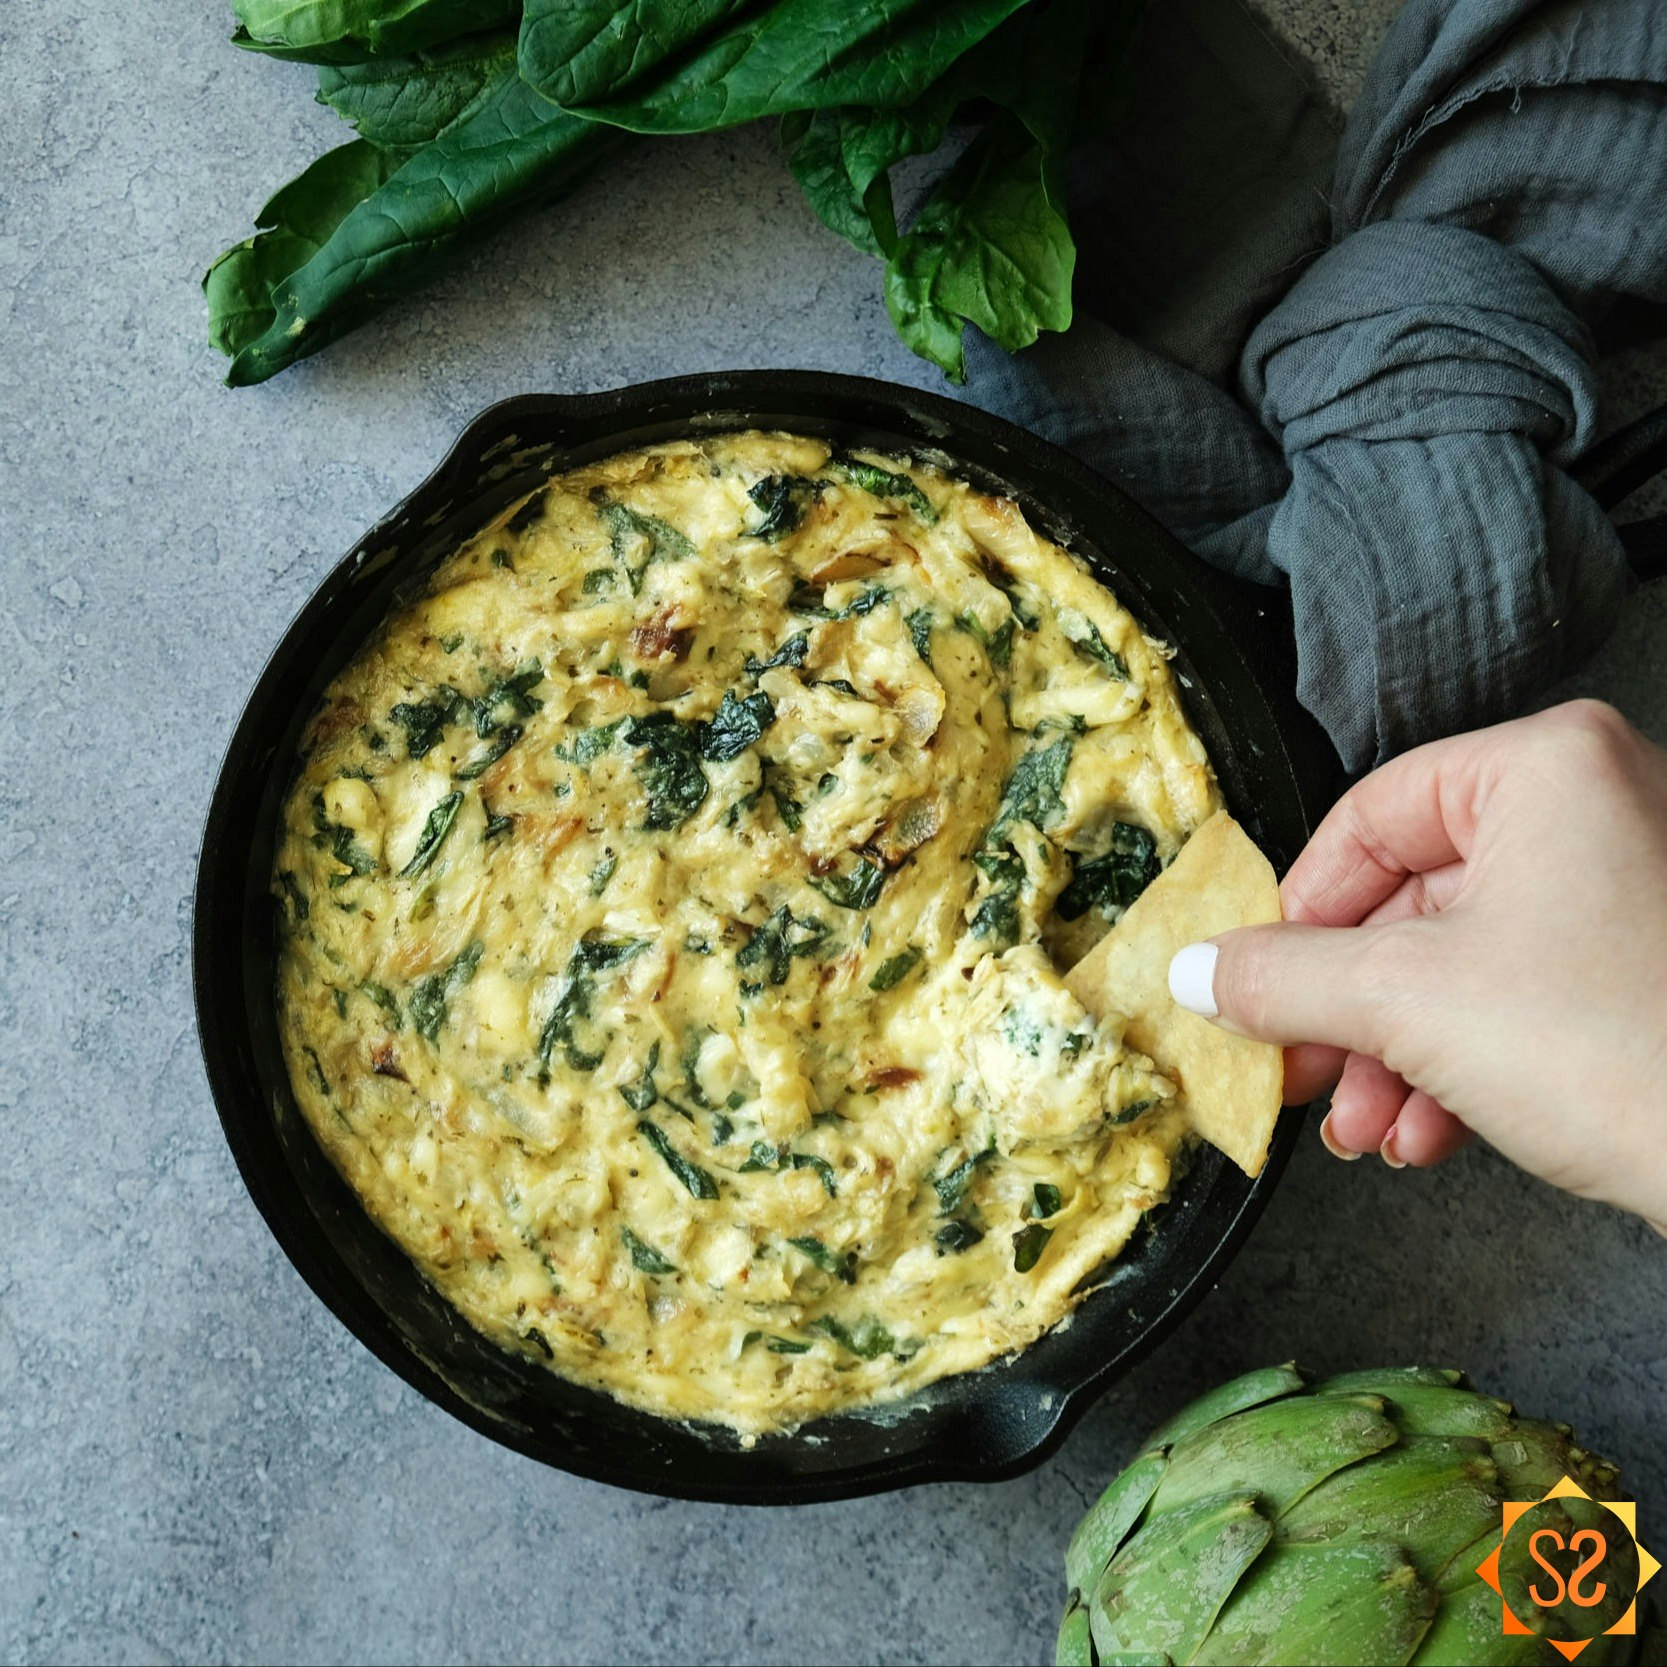 A hand dipping a chip into vegan spinach and artichoke dip.